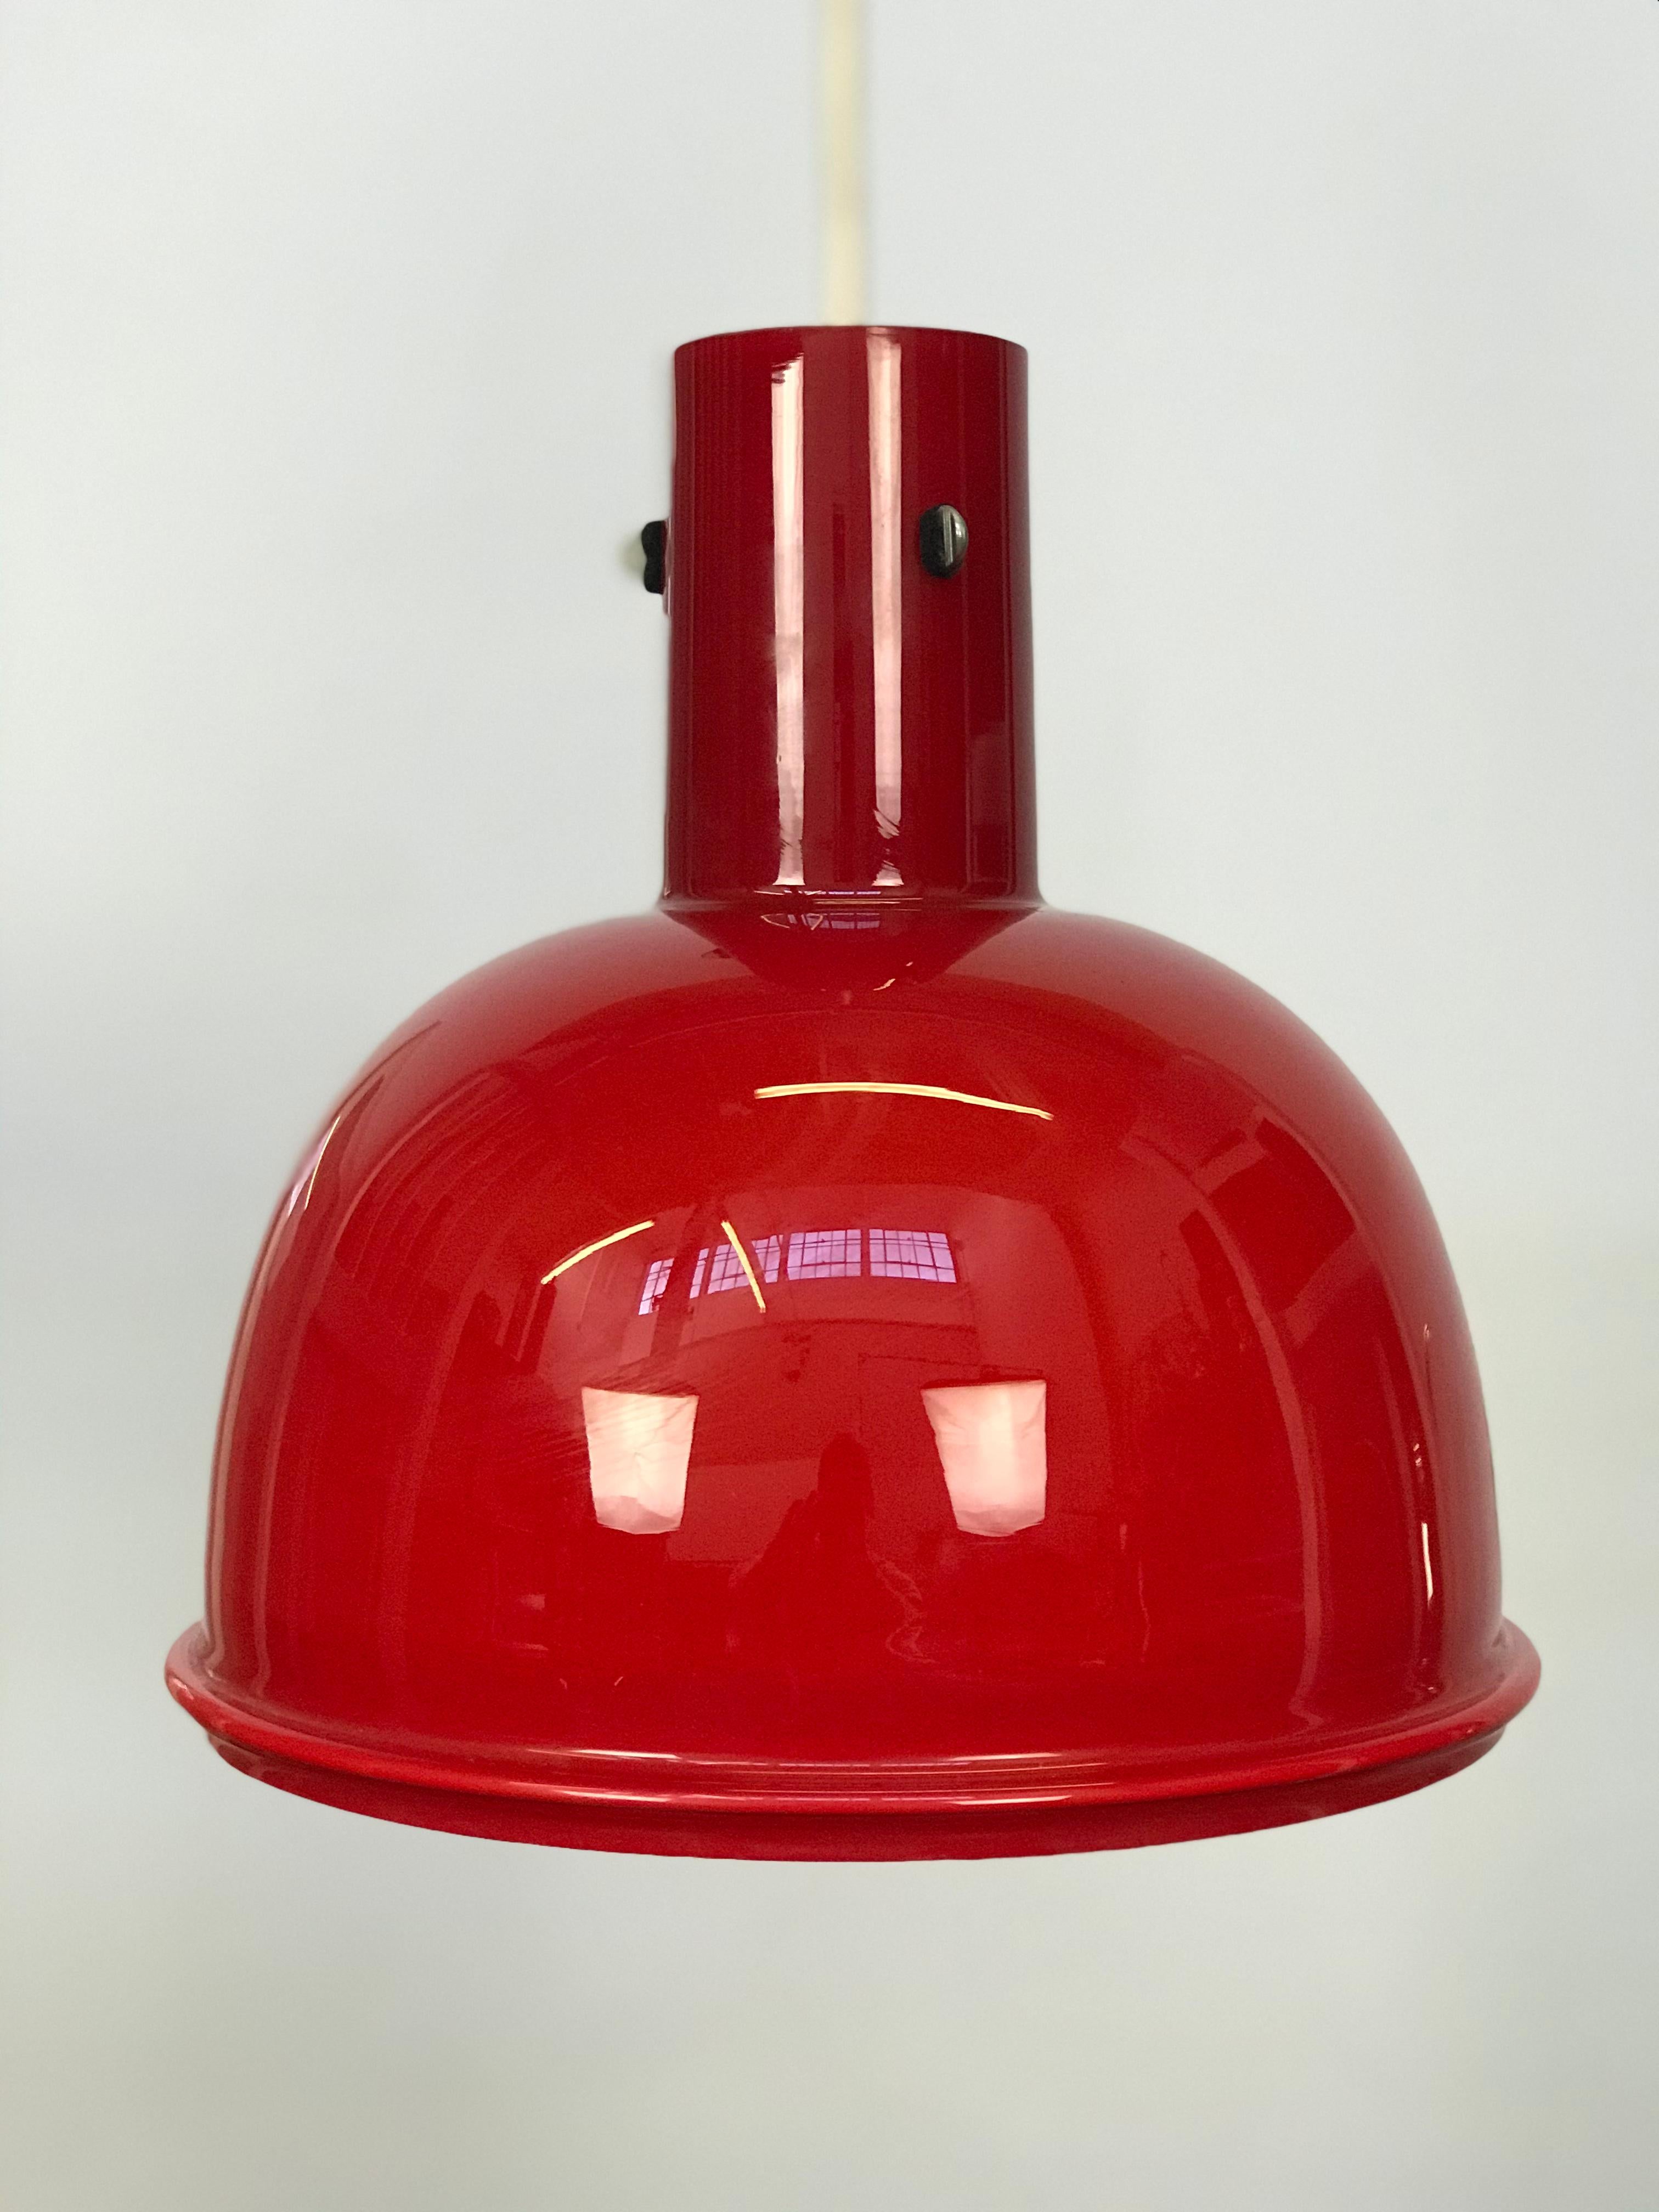 Well made thick red opaque milk glass pendant light by the noted lighting firm Glashutee Limburg for Lightolier: from the original owner. Purchased in 1979. Single cord suspension measures 26